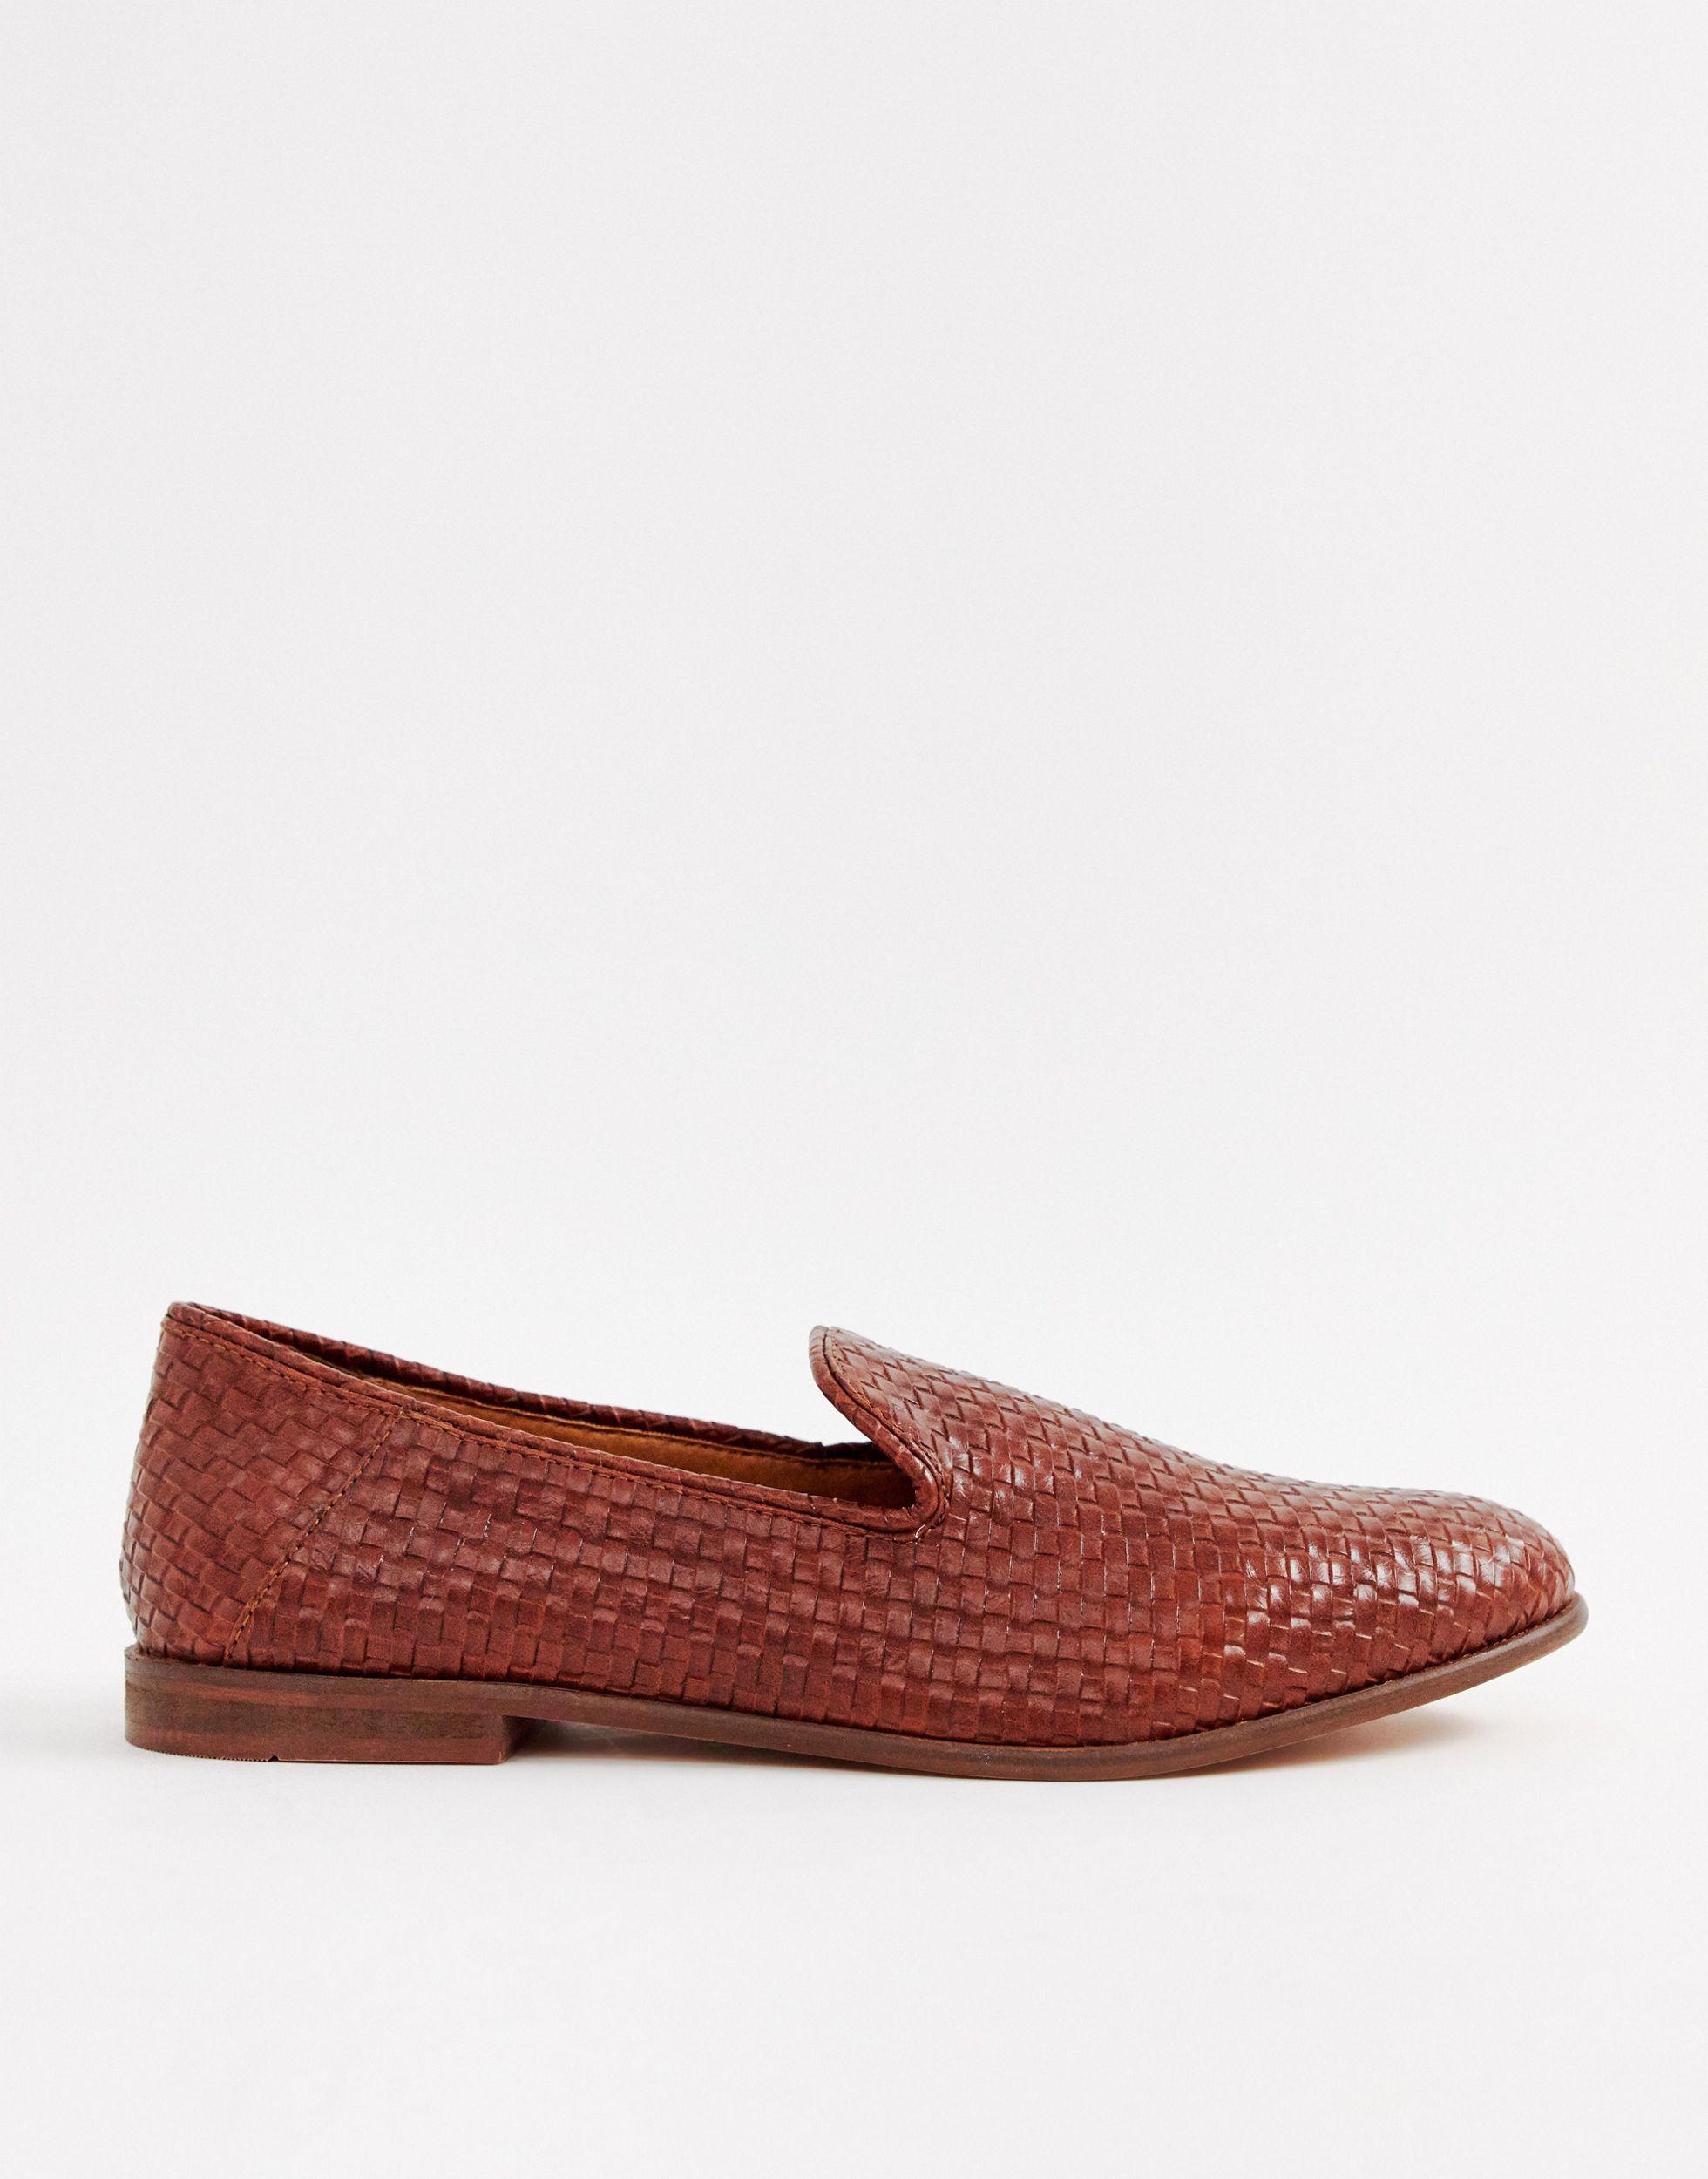 KG by Kurt Geiger Leather Kg By Kurt Geiger Woven Loafers in Tan (Brown)  for Men - Lyst